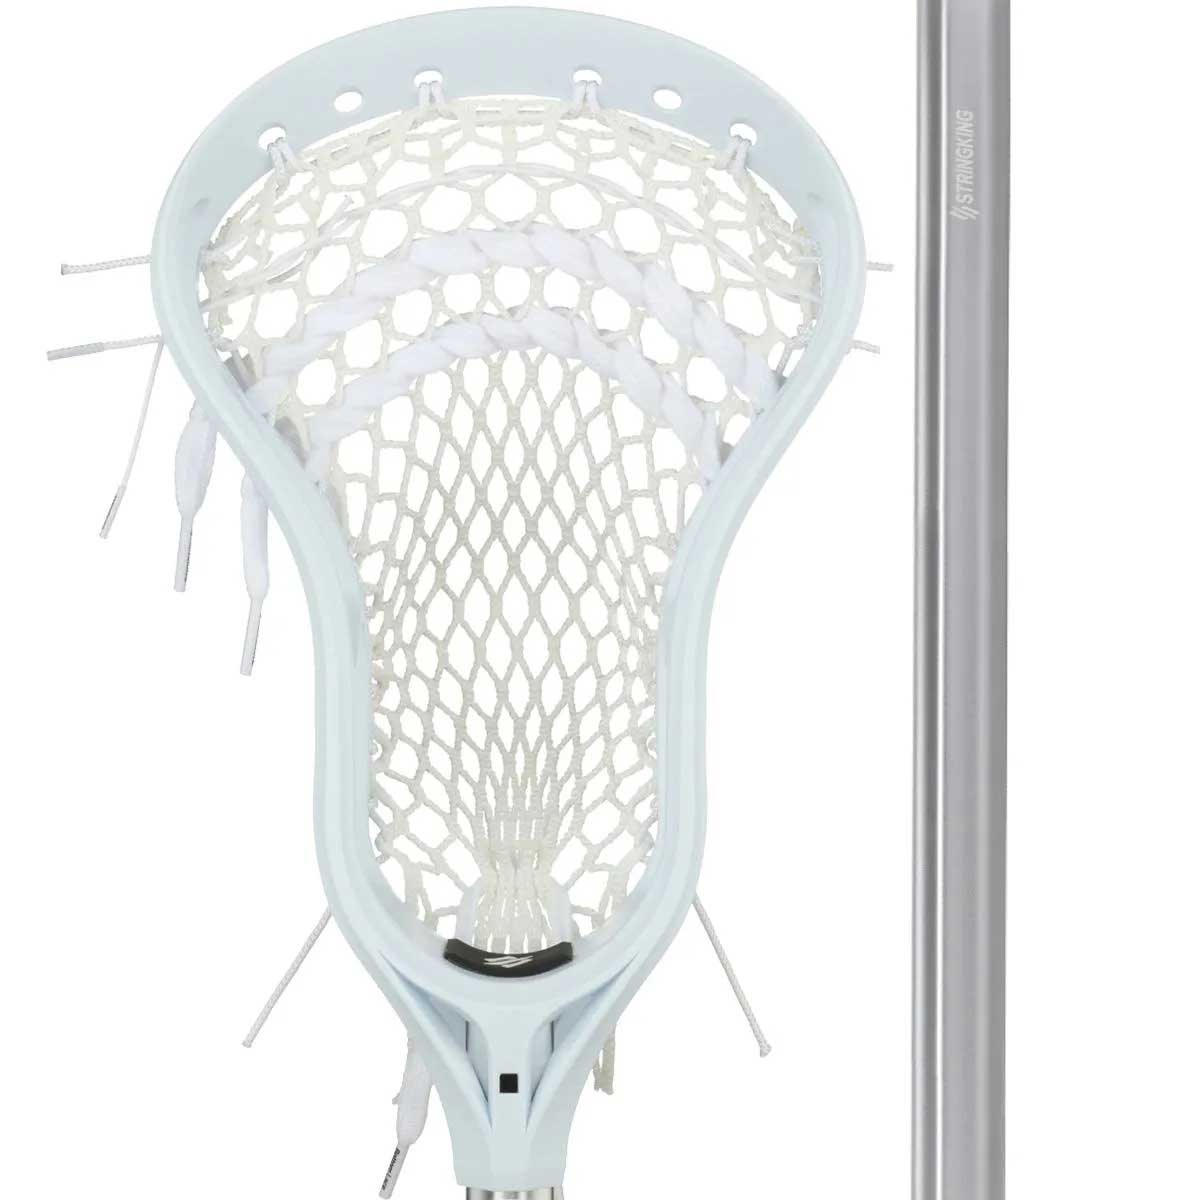 StringKing Complete 2 Senior Lacrosse Stick closeup of head and shaft